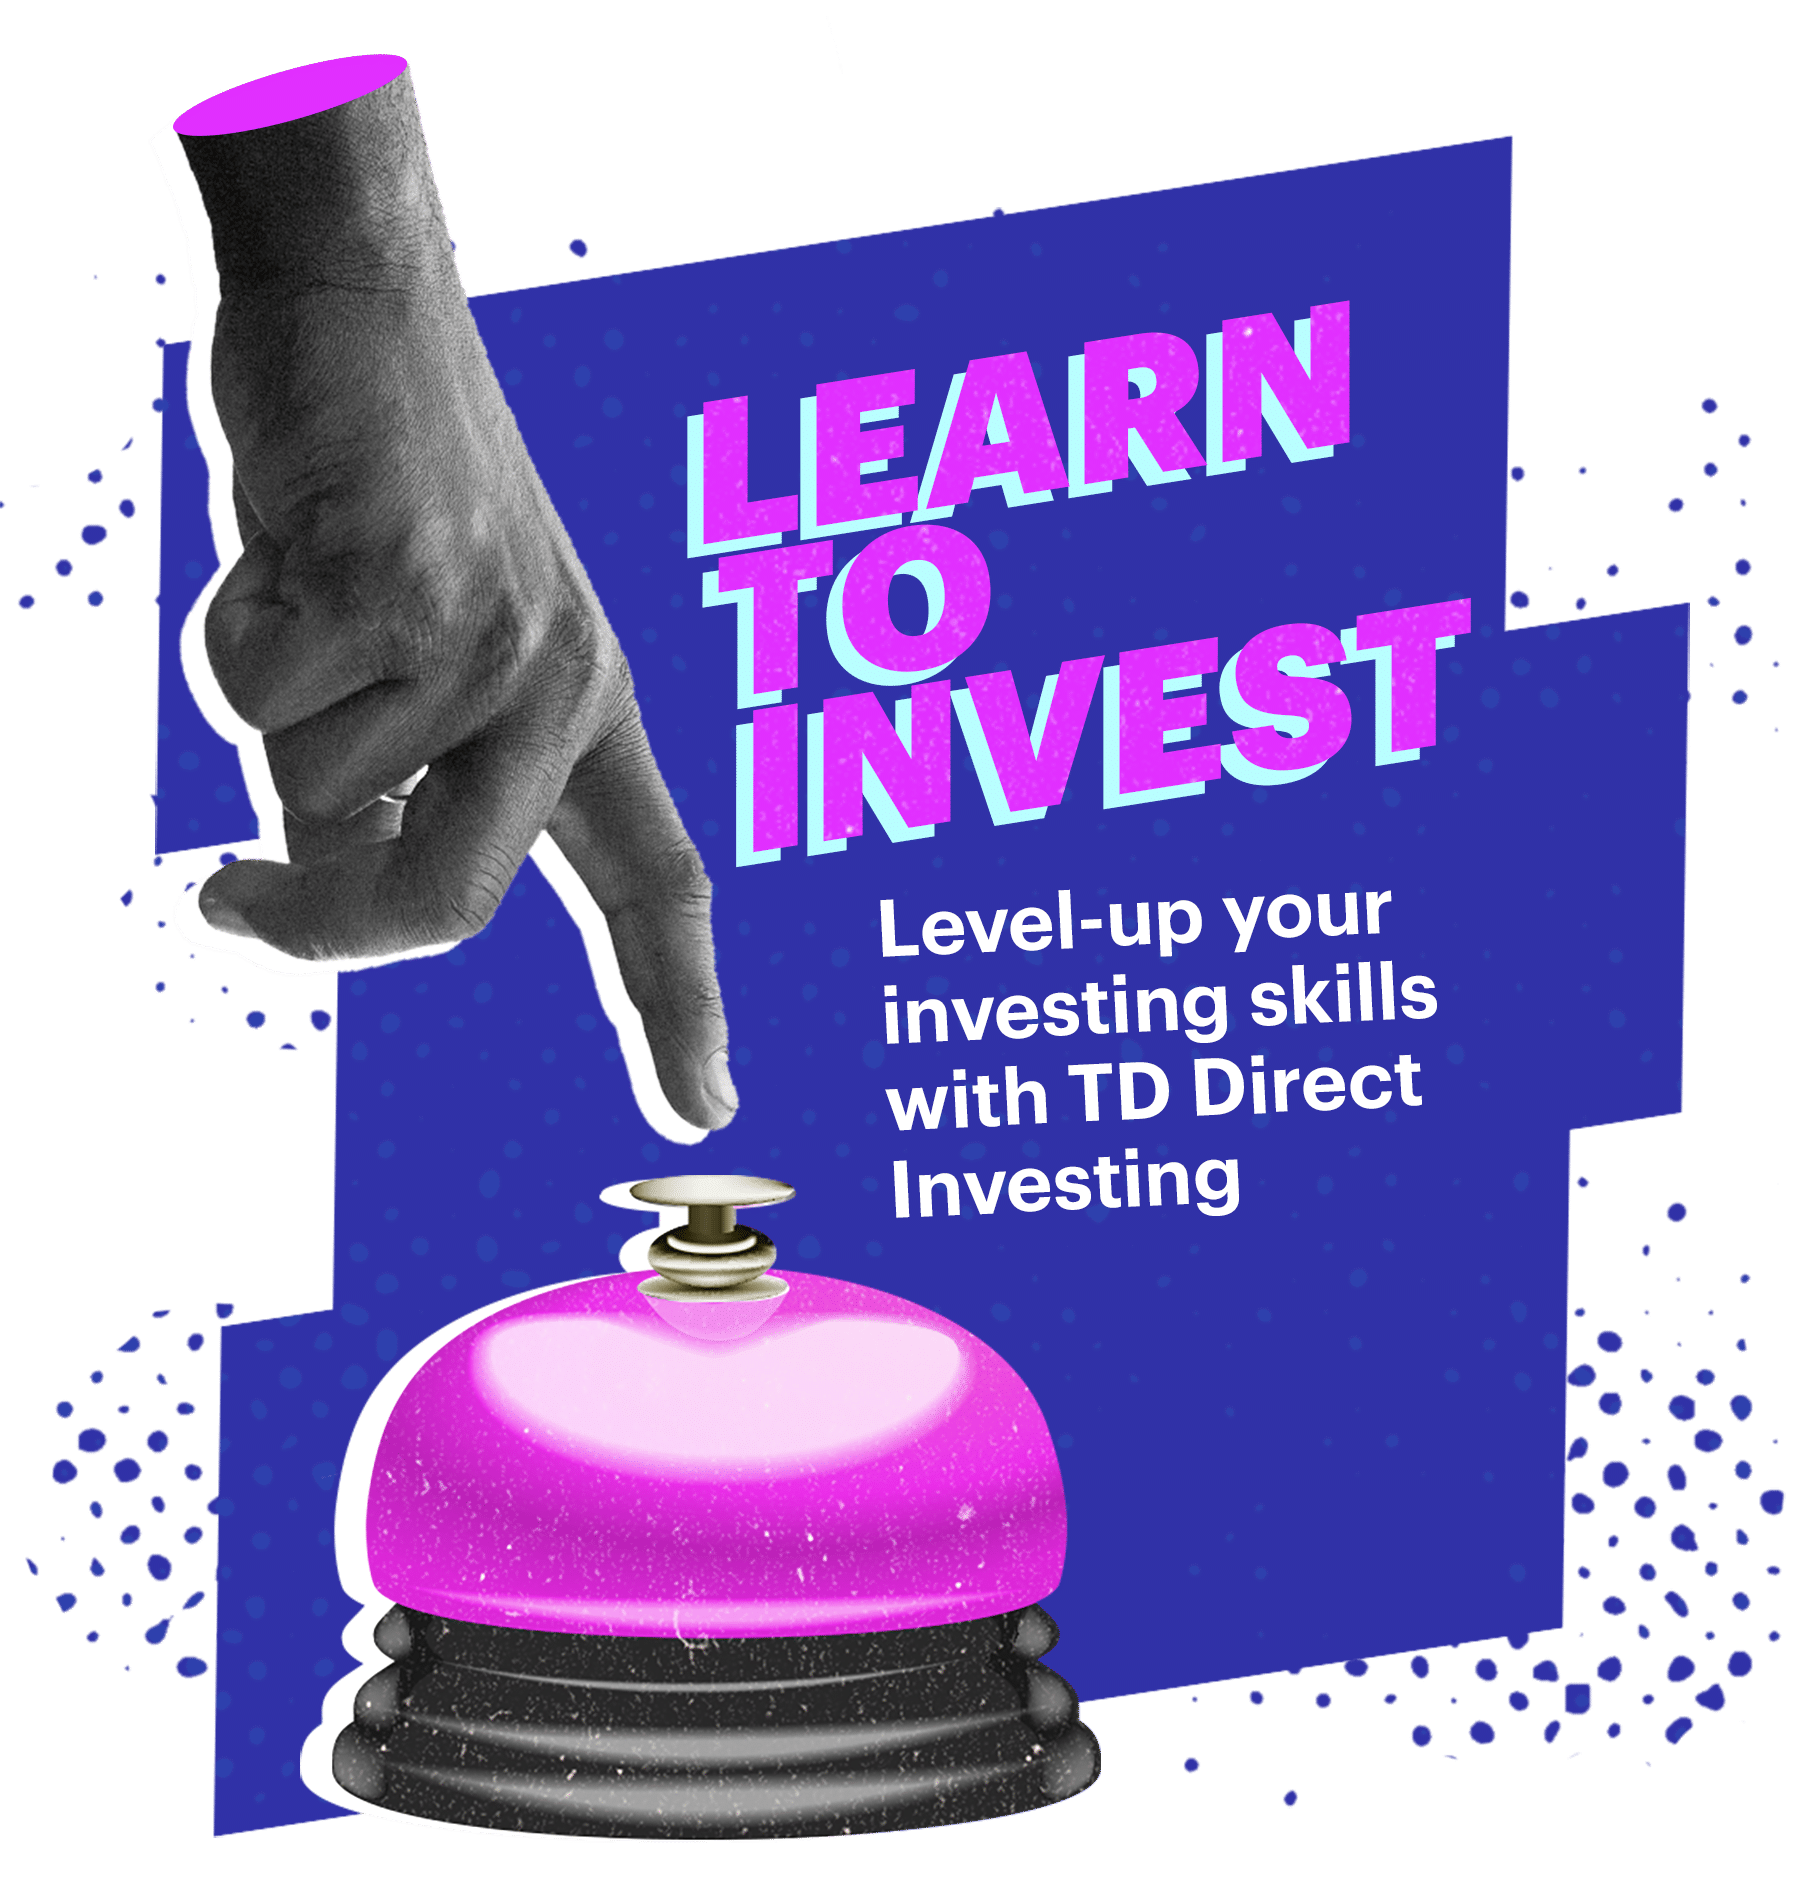 Learn to Invest. Level-up your investing skills with TD Direct Investing